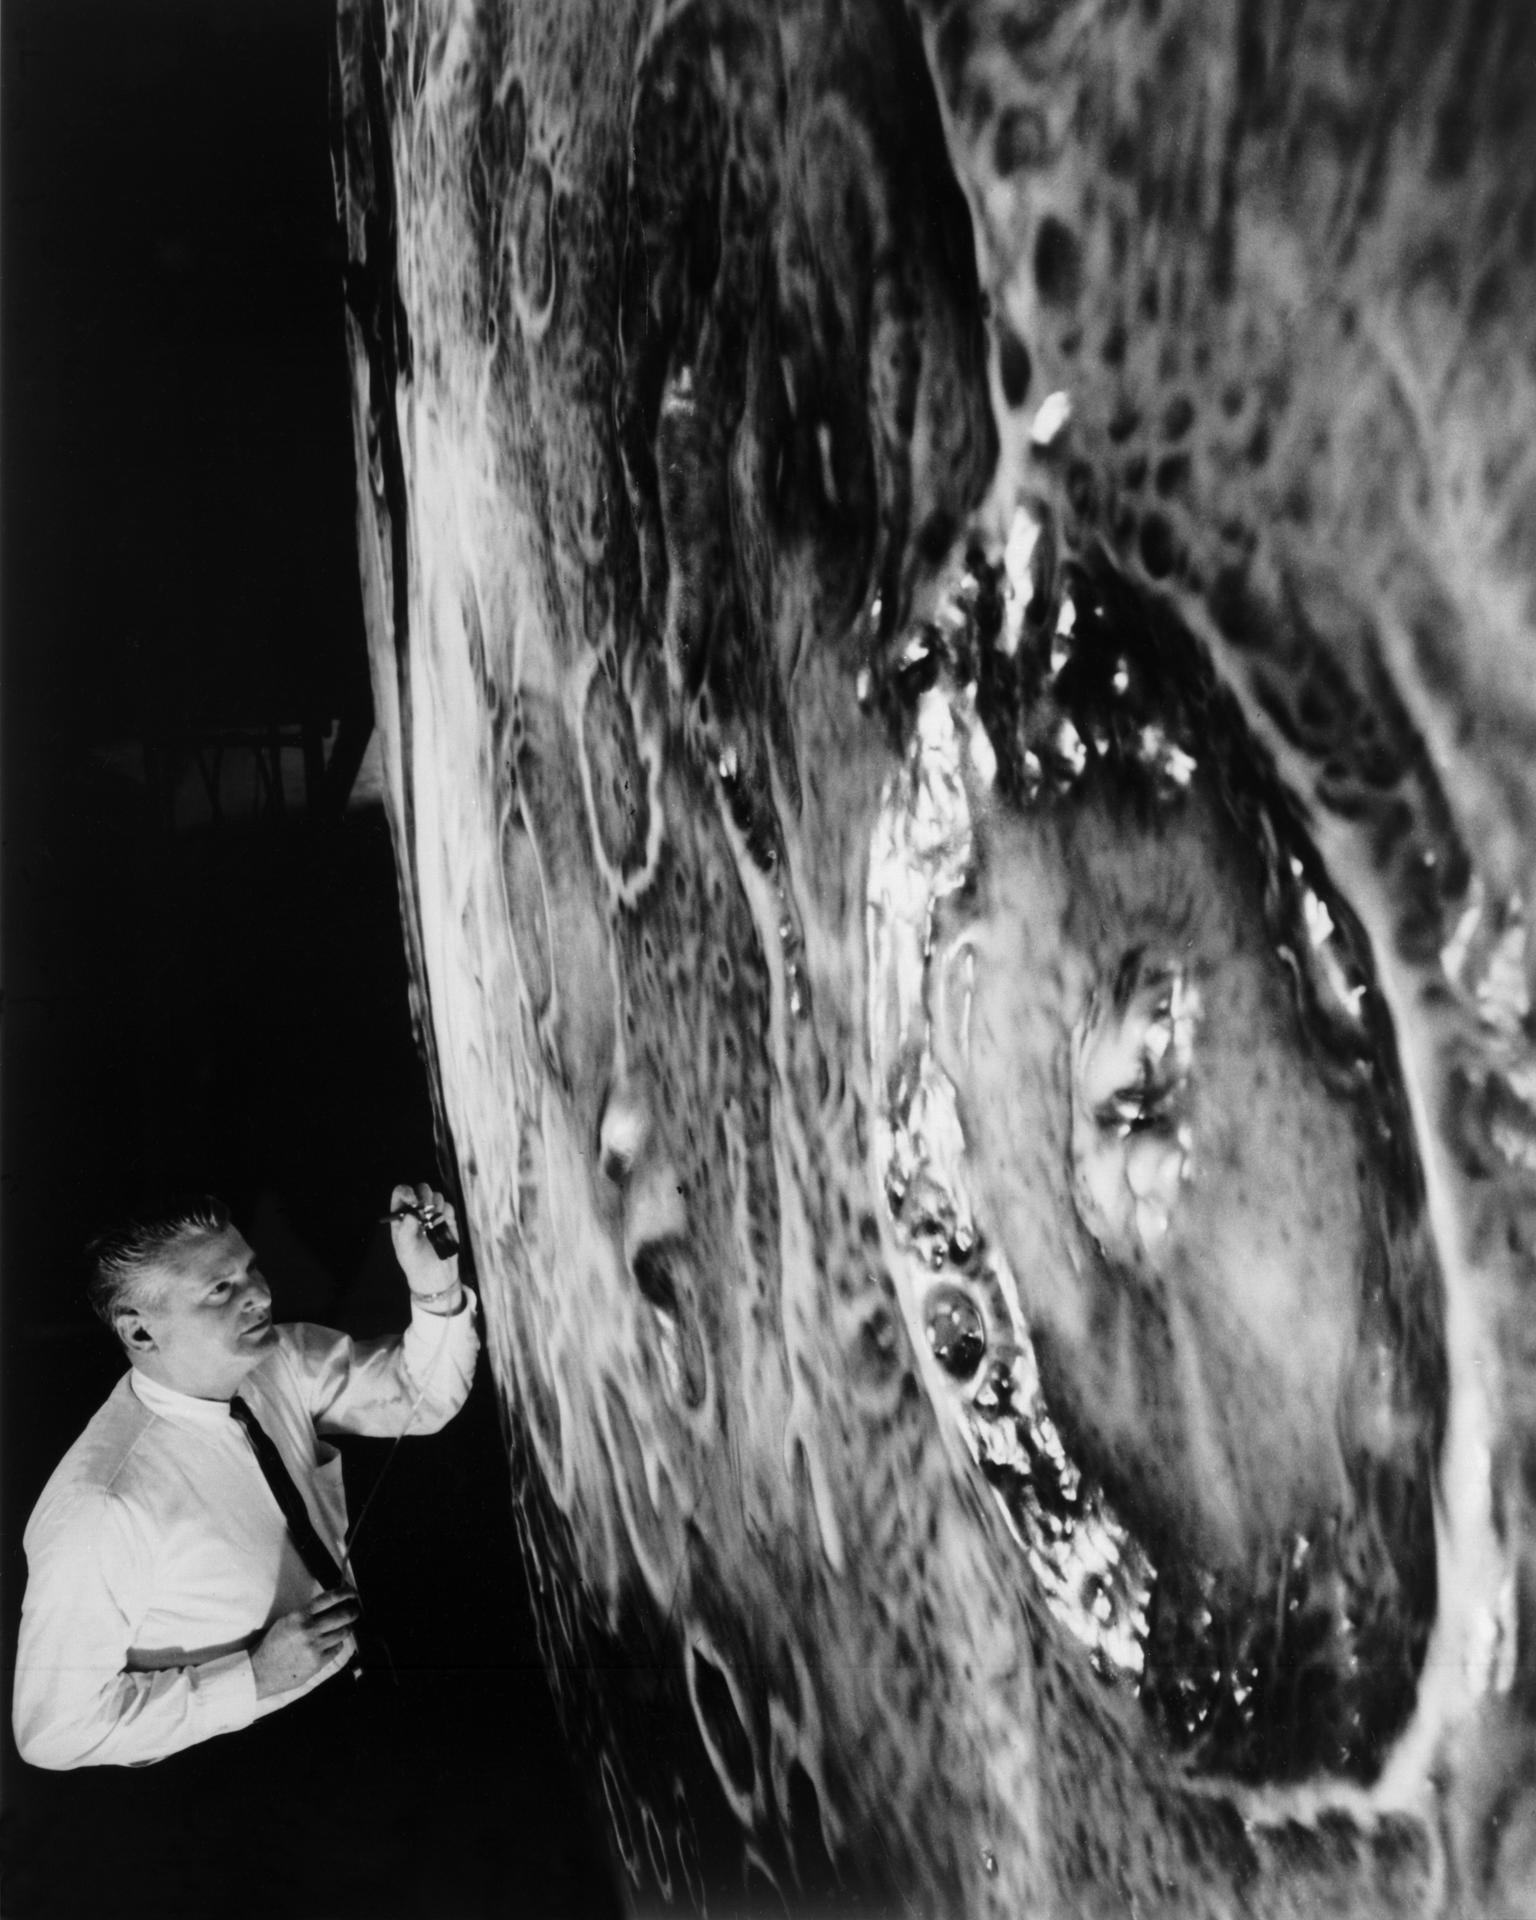 In this black-and-white photo, a man in a white shirt and dark tie uses an airbrush to paint on a large model that looks like the surface of the Moon. A crater is in the foreground, emphasizing the large size of the Moon model.